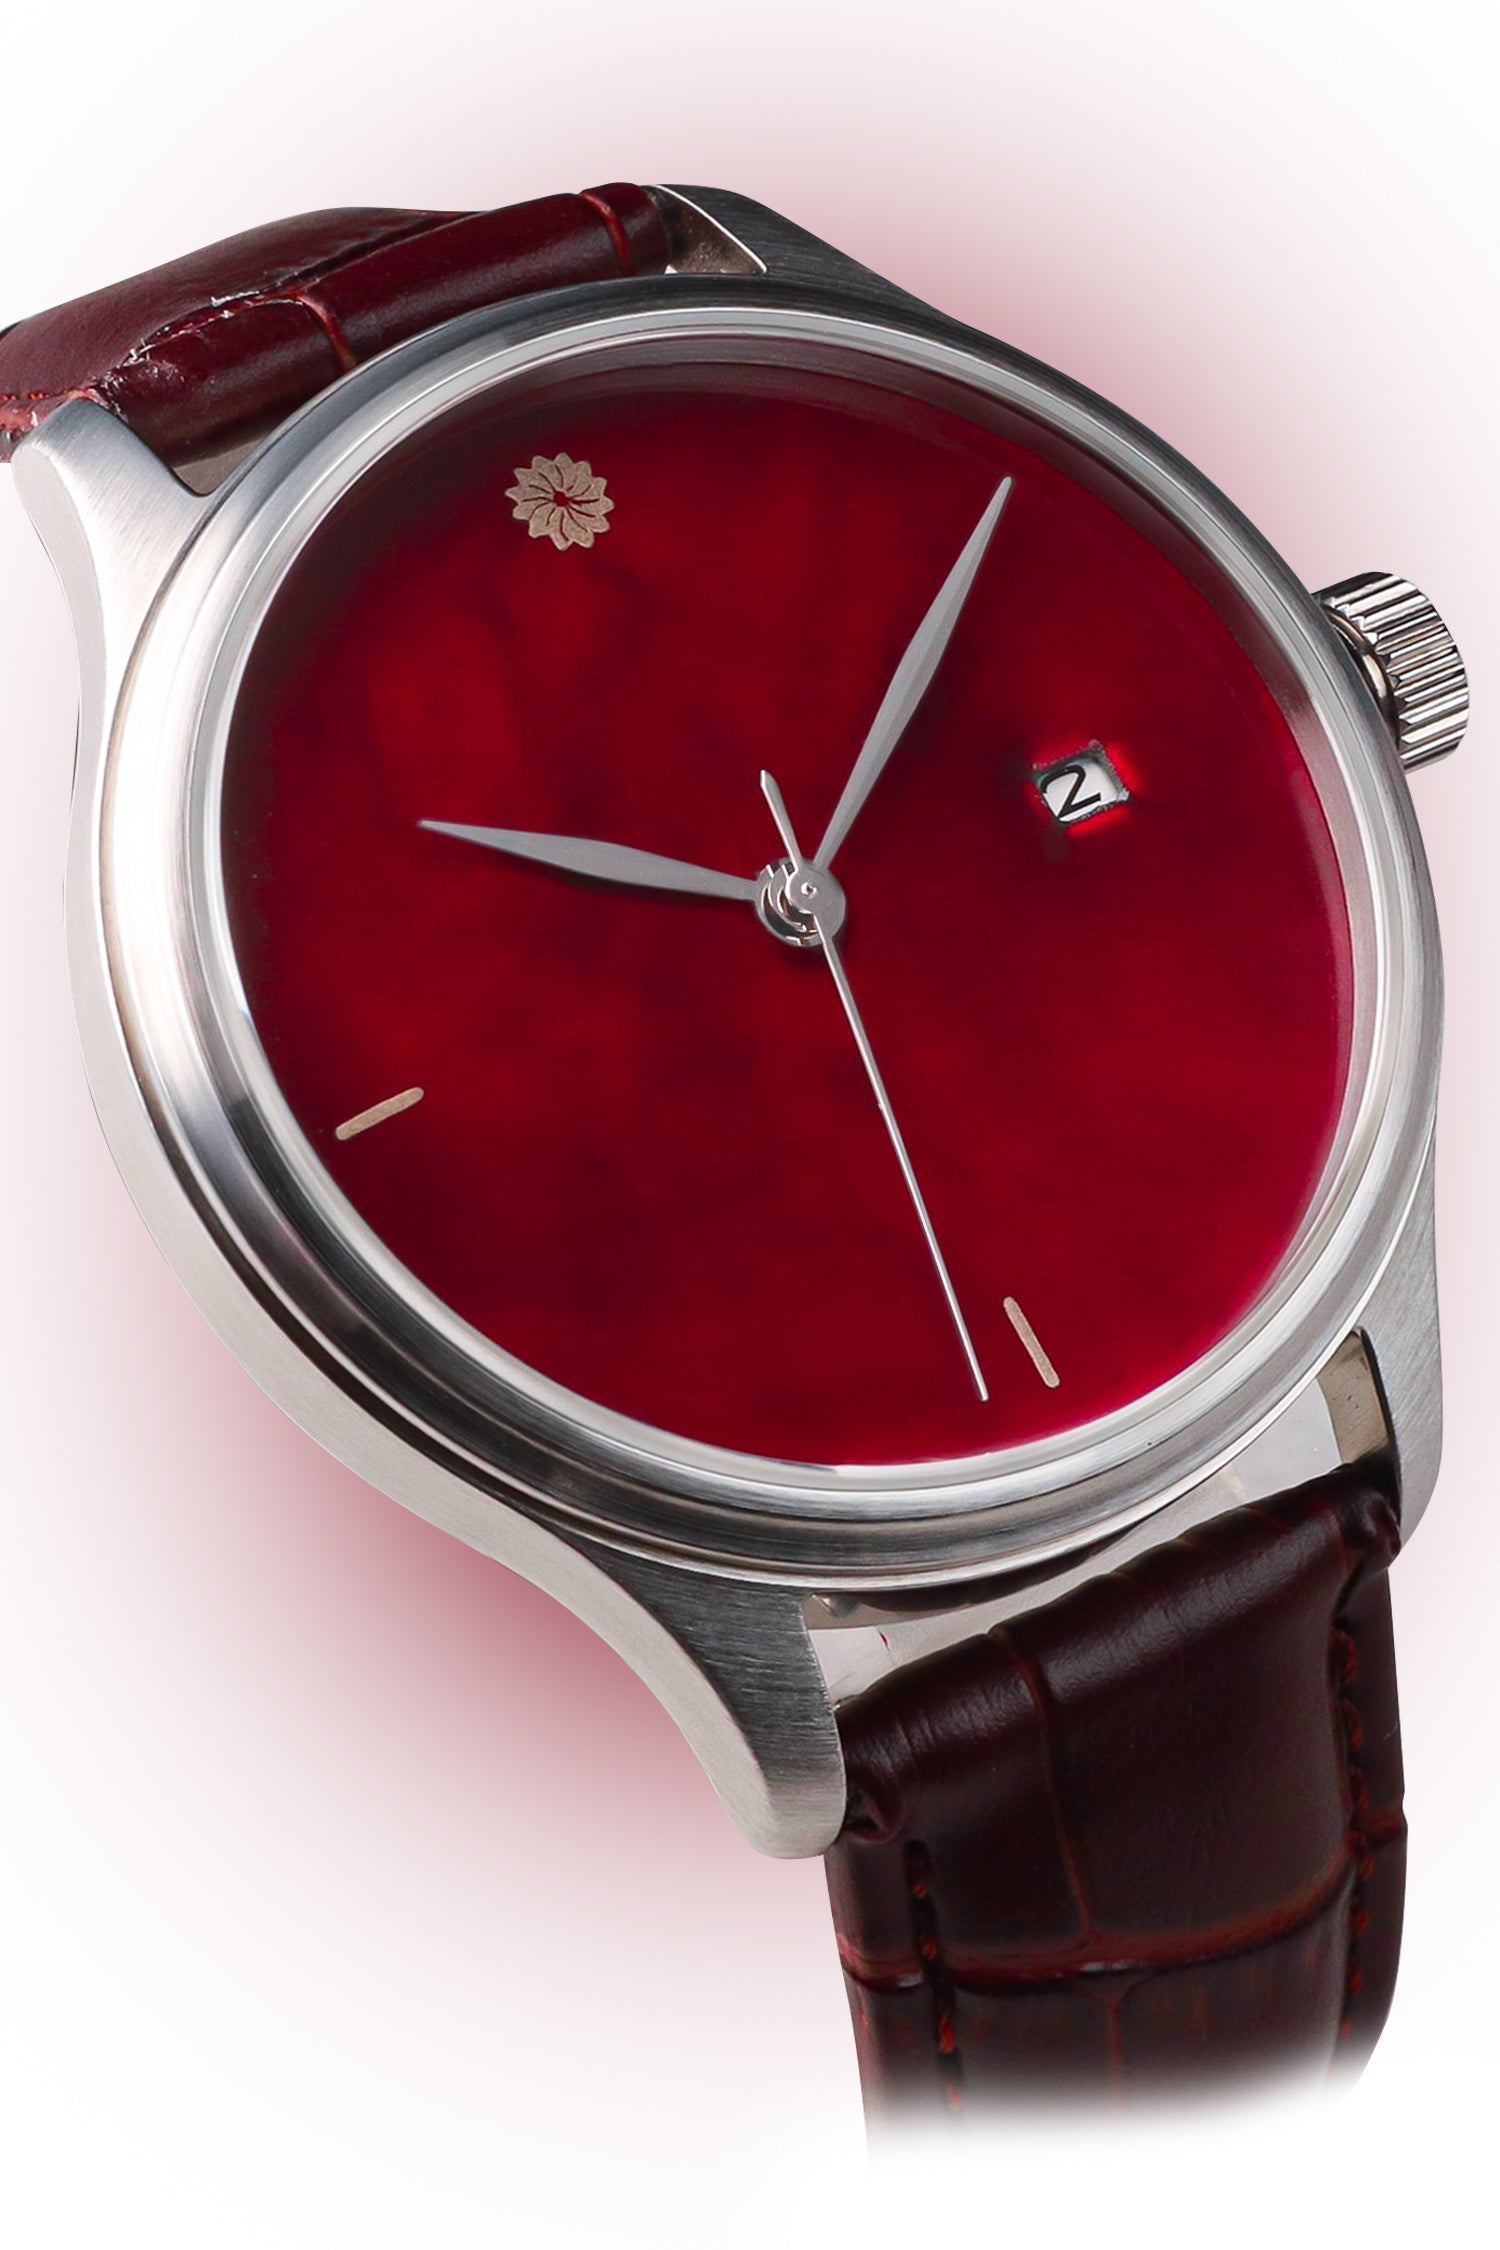 LIMITED EDITION Dream Watch - Akatame Nuri Dark Red Urushi Dial - Wancher Watch Wancher Watch Wancher Watch LIMITED EDITION Dream Watch - Akatame Nuri Dark Red Urushi Dial {{ Automatic Watch {{ Watch }} }} {{ Japan }} Wancher Dream Watch - Akatame-nuri Red Urushi Dial Automatic Self-winding Watch with Domed Sapphire Glass and Miyota 9015 Mechanical Movement, Featuring Premium Japanese Craftsmanship and Genuine Cowhide/Galuchat Strap